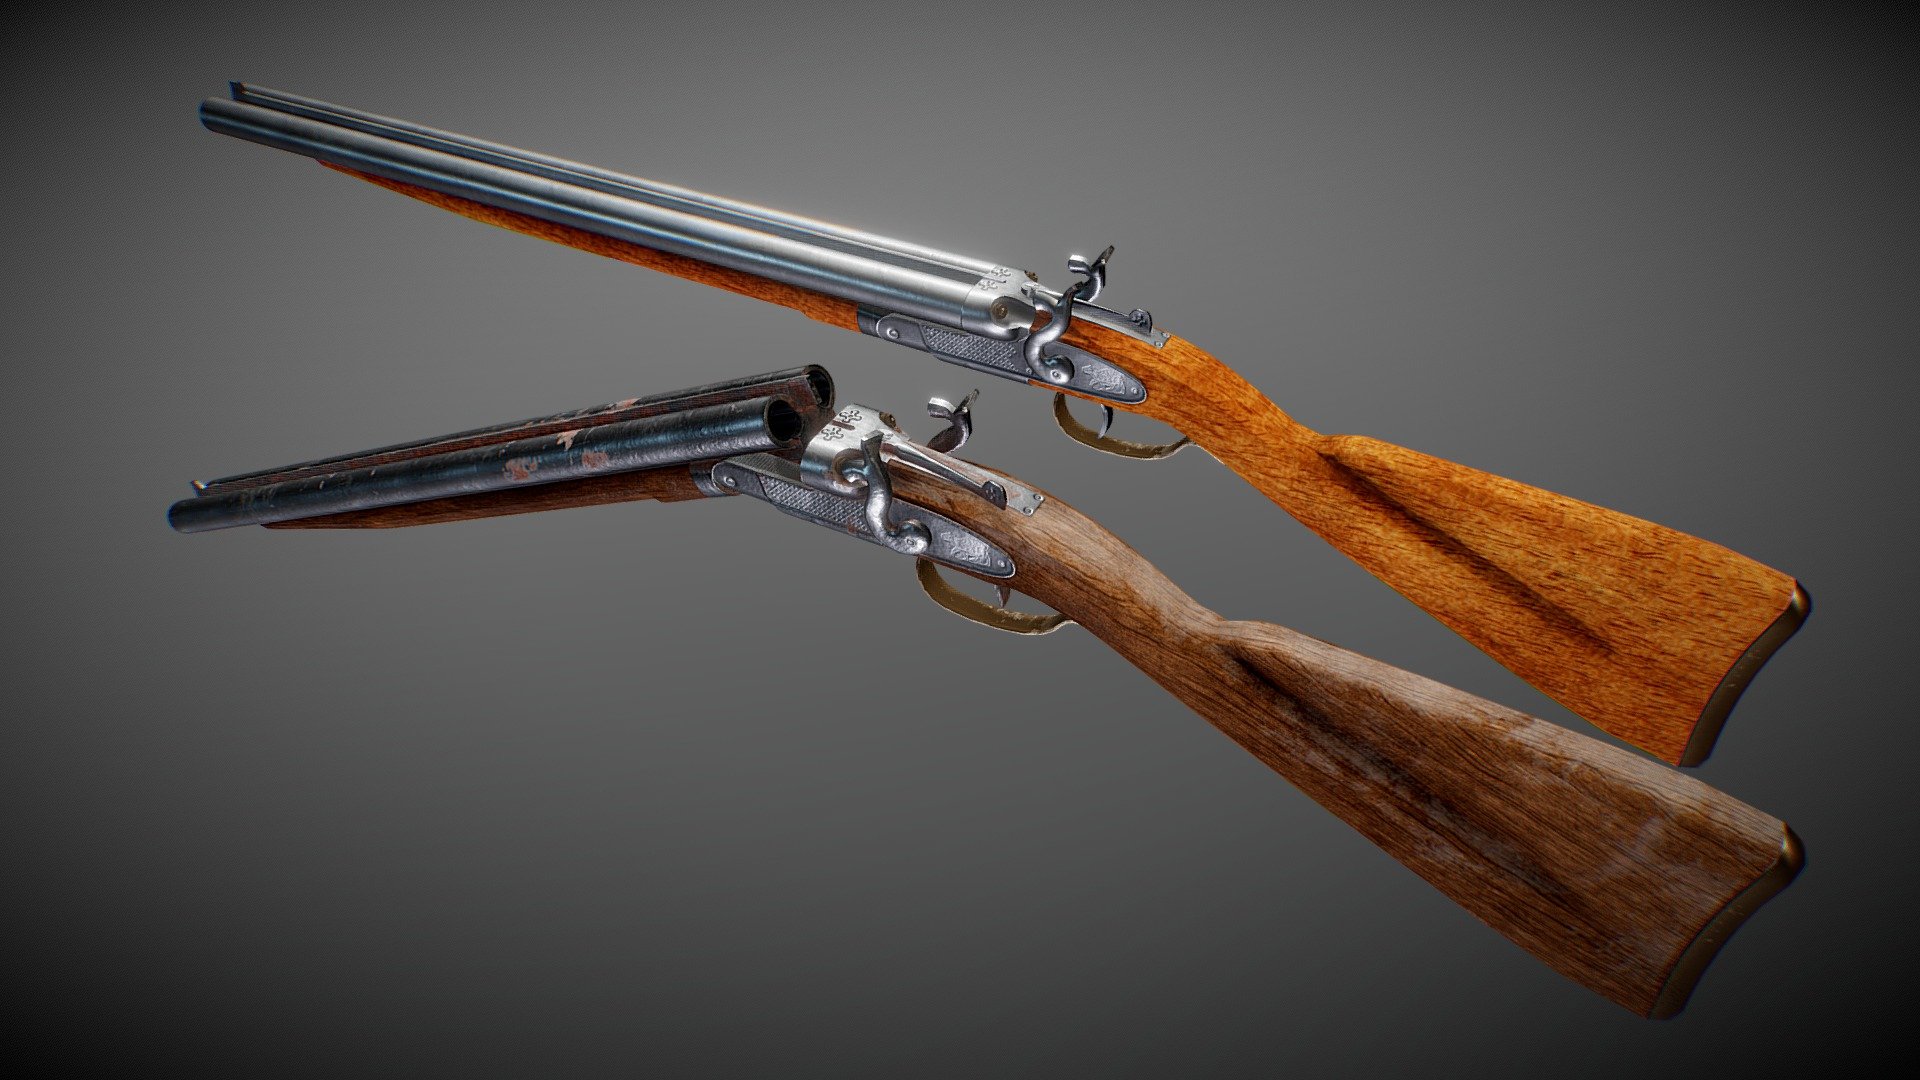 Customized double-barreled shotgun model.
Inspired by an old shotgun model from the late 17th century manufactured in France, with modifications and updates to be used in the &ldquo;Inconfidencia Mineira (pt-br)